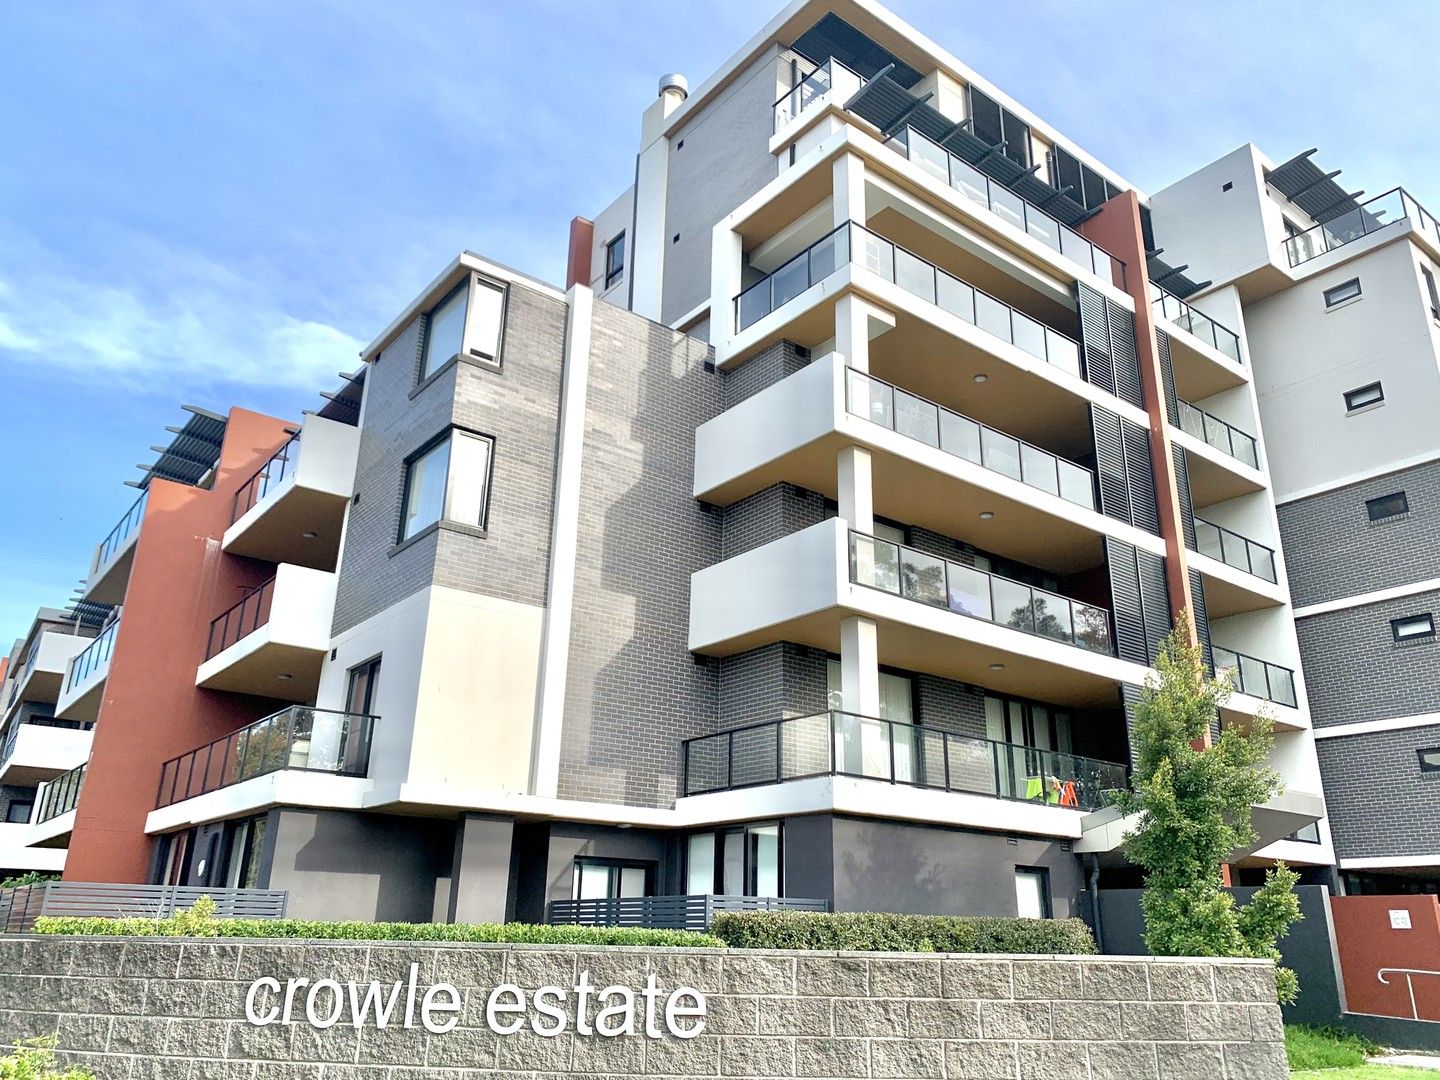 2 bedrooms Apartment / Unit / Flat in 3031/74B Belmore St RYDE NSW, 2112